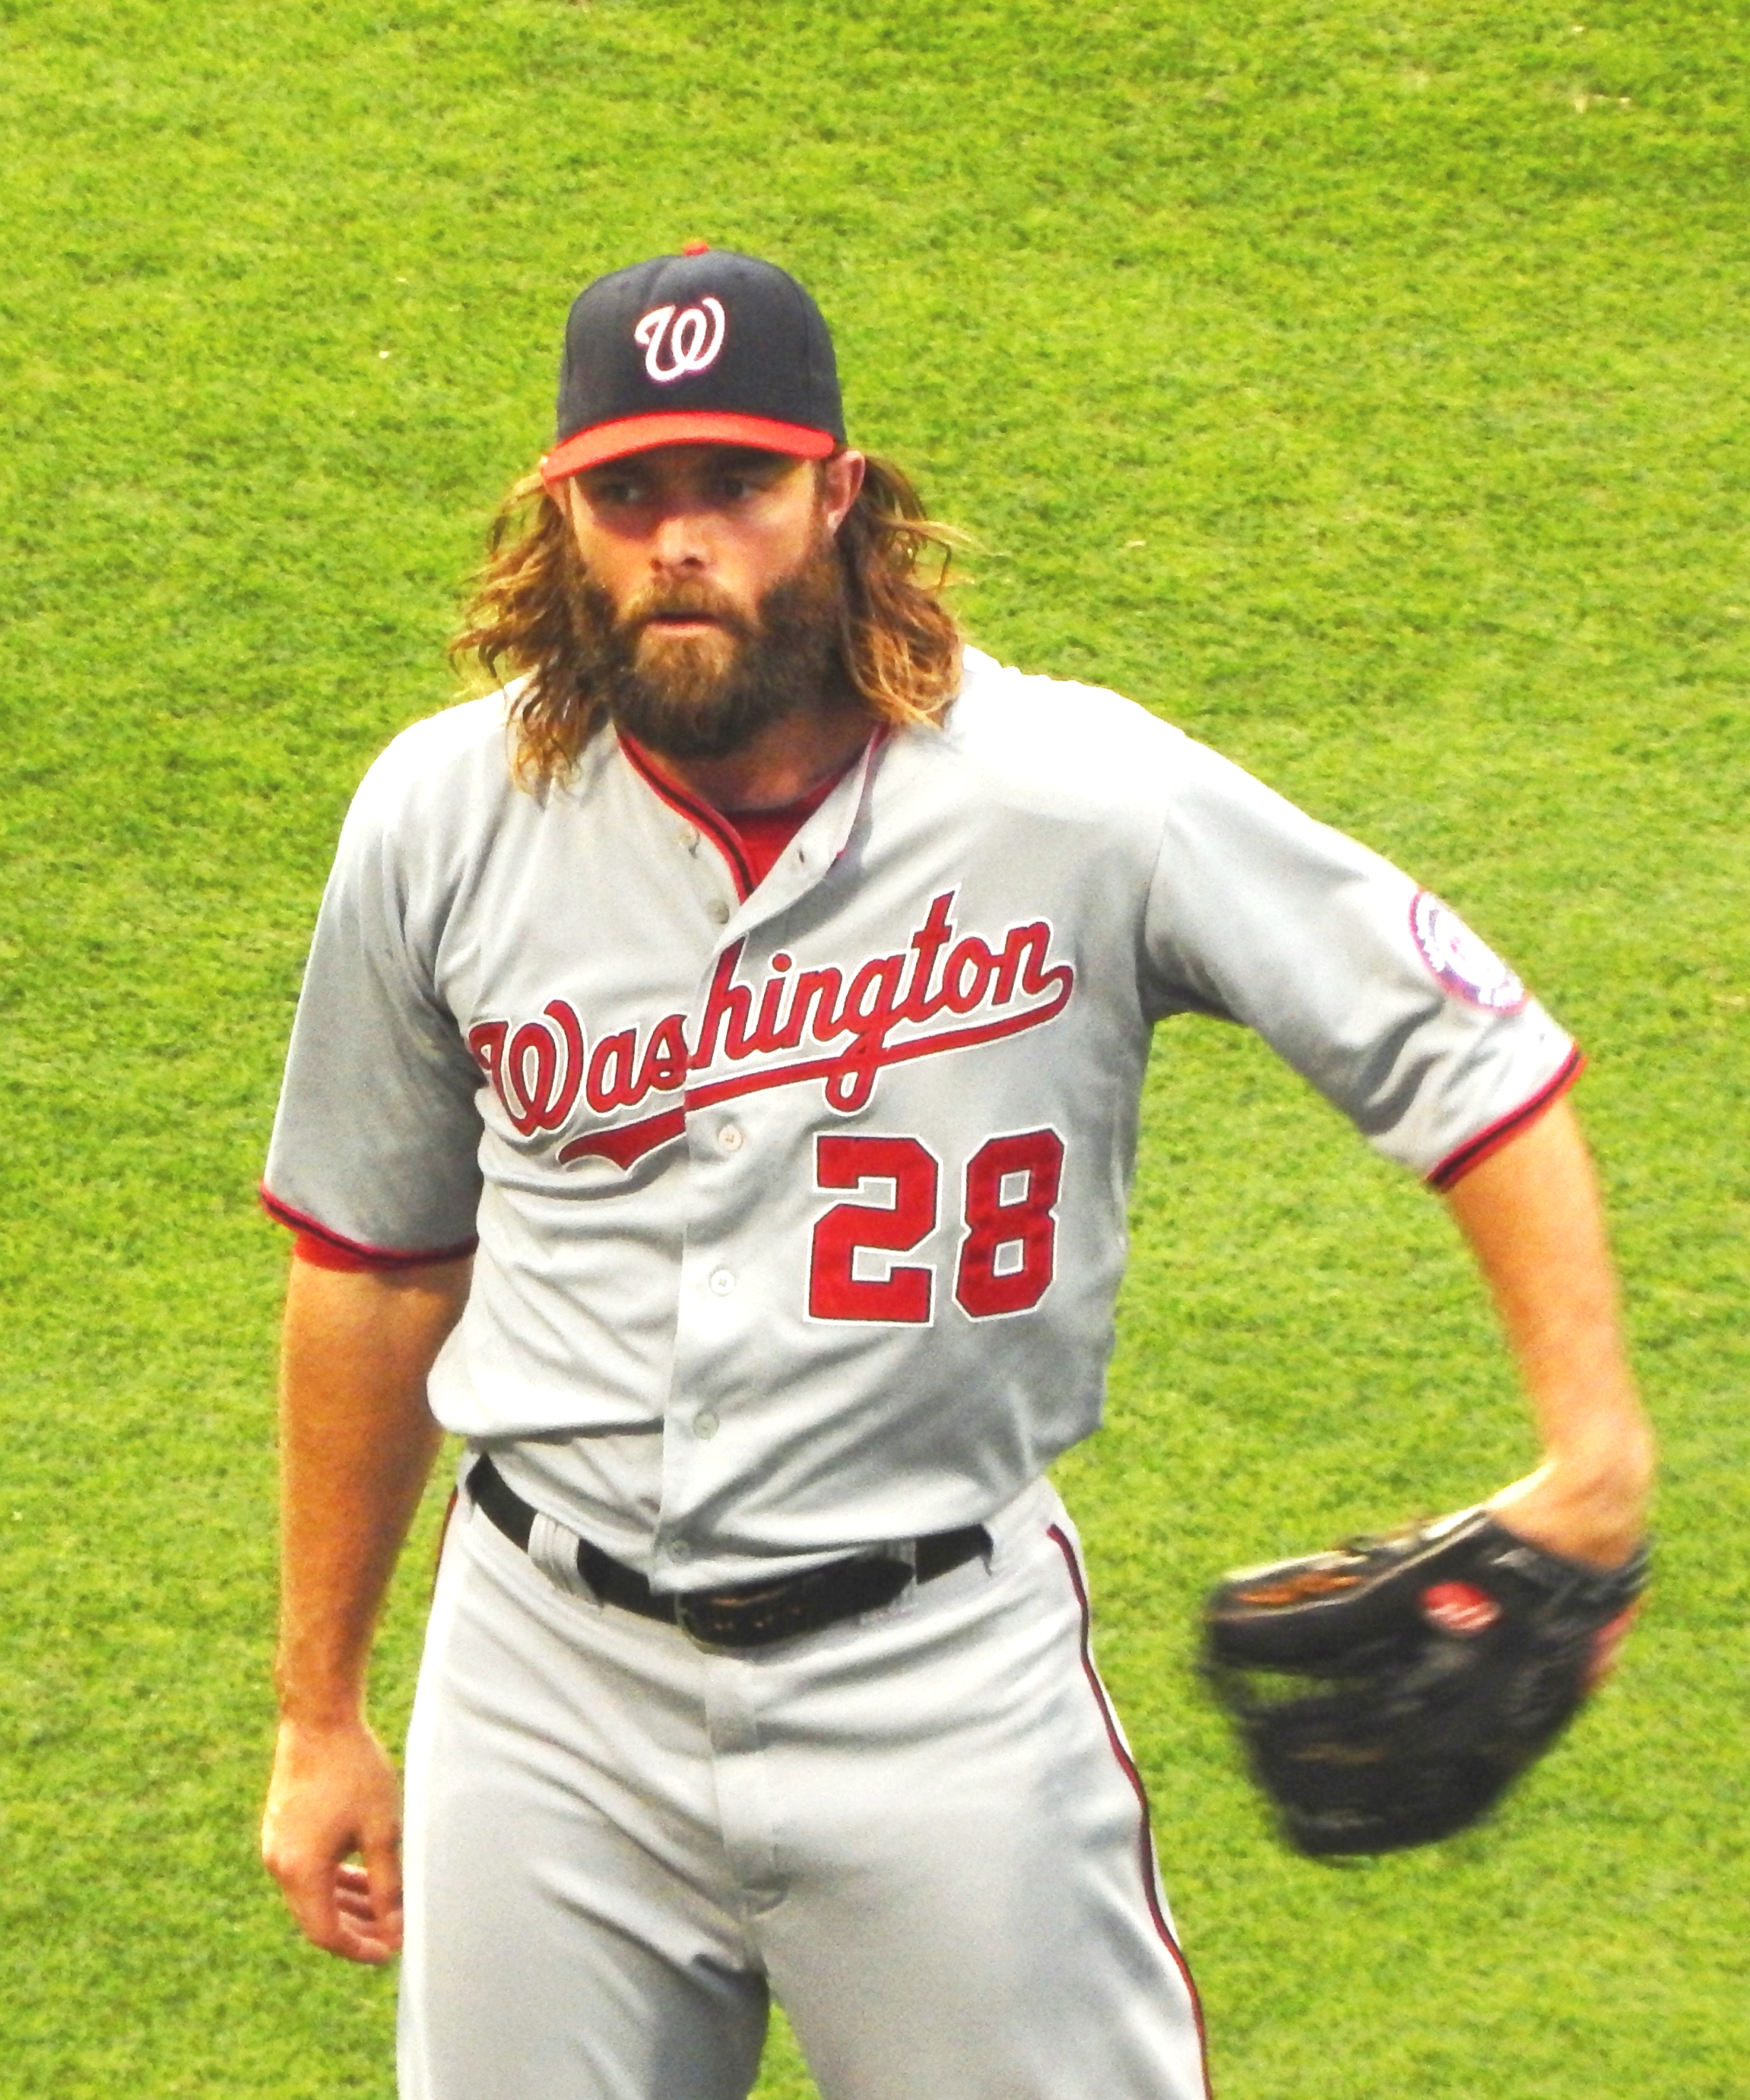 Information about the WASHINGTON NATIONALS